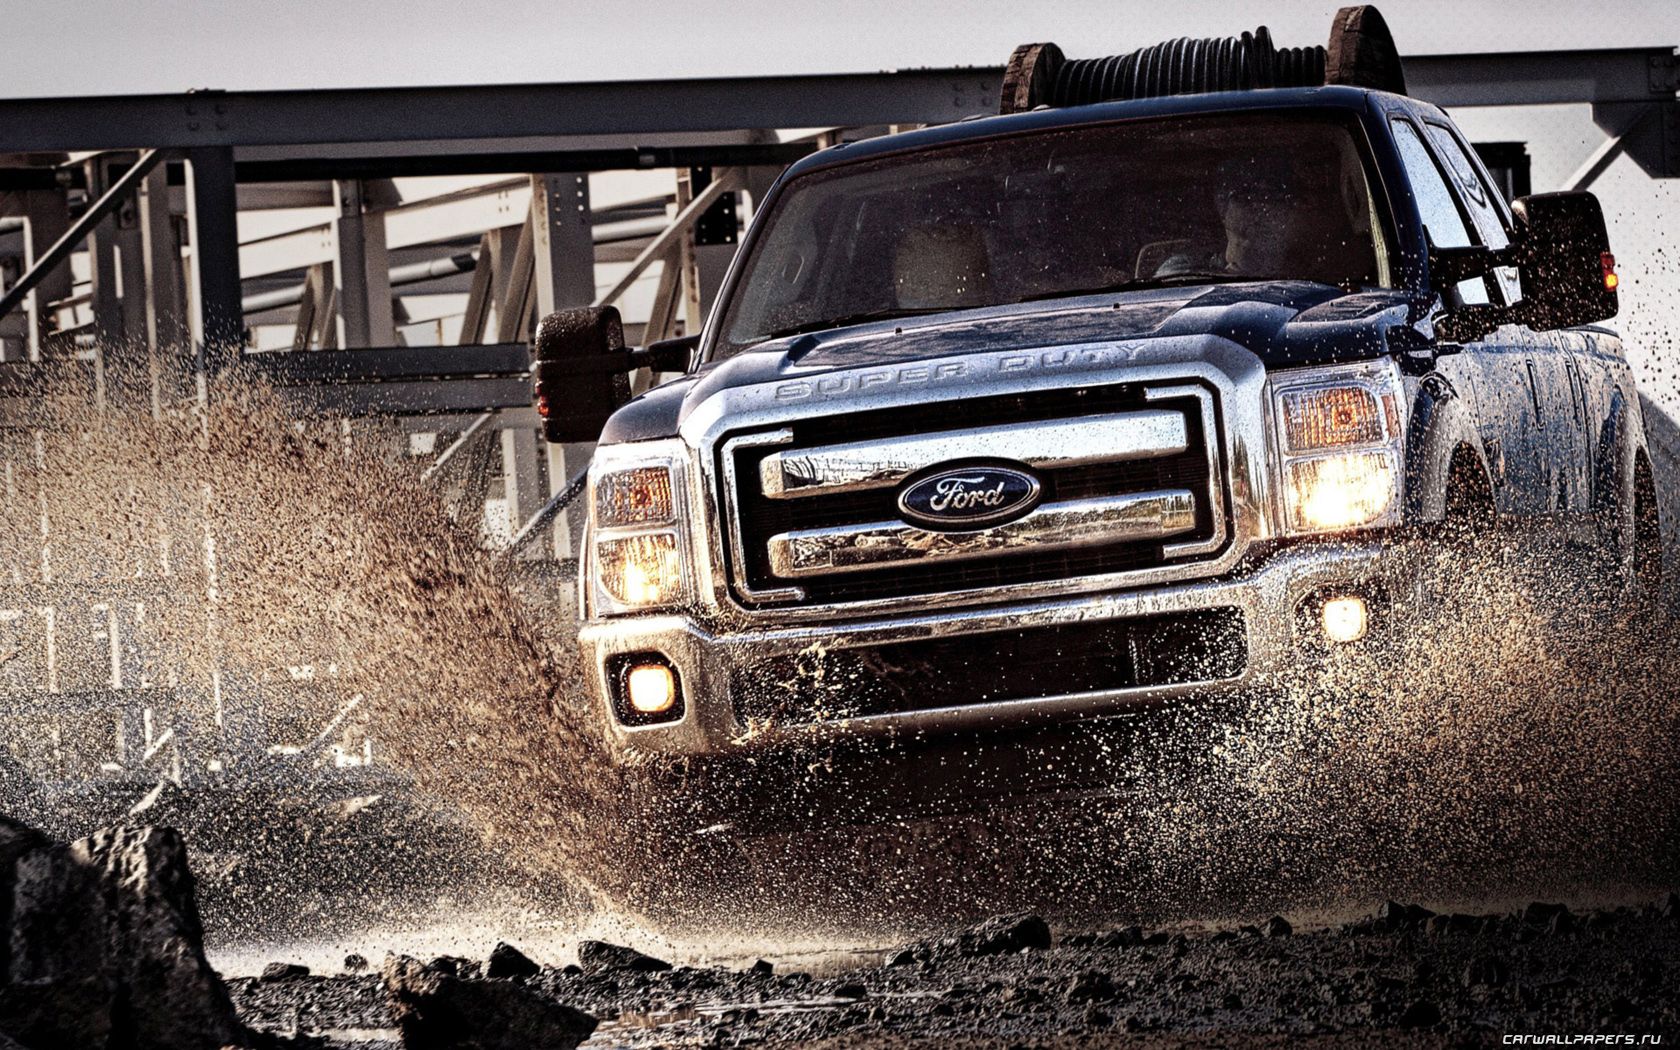 Ford F super Duty truck pickup cars black tuning wallpaper. Pickup car, Ford diesel, Built ford tough